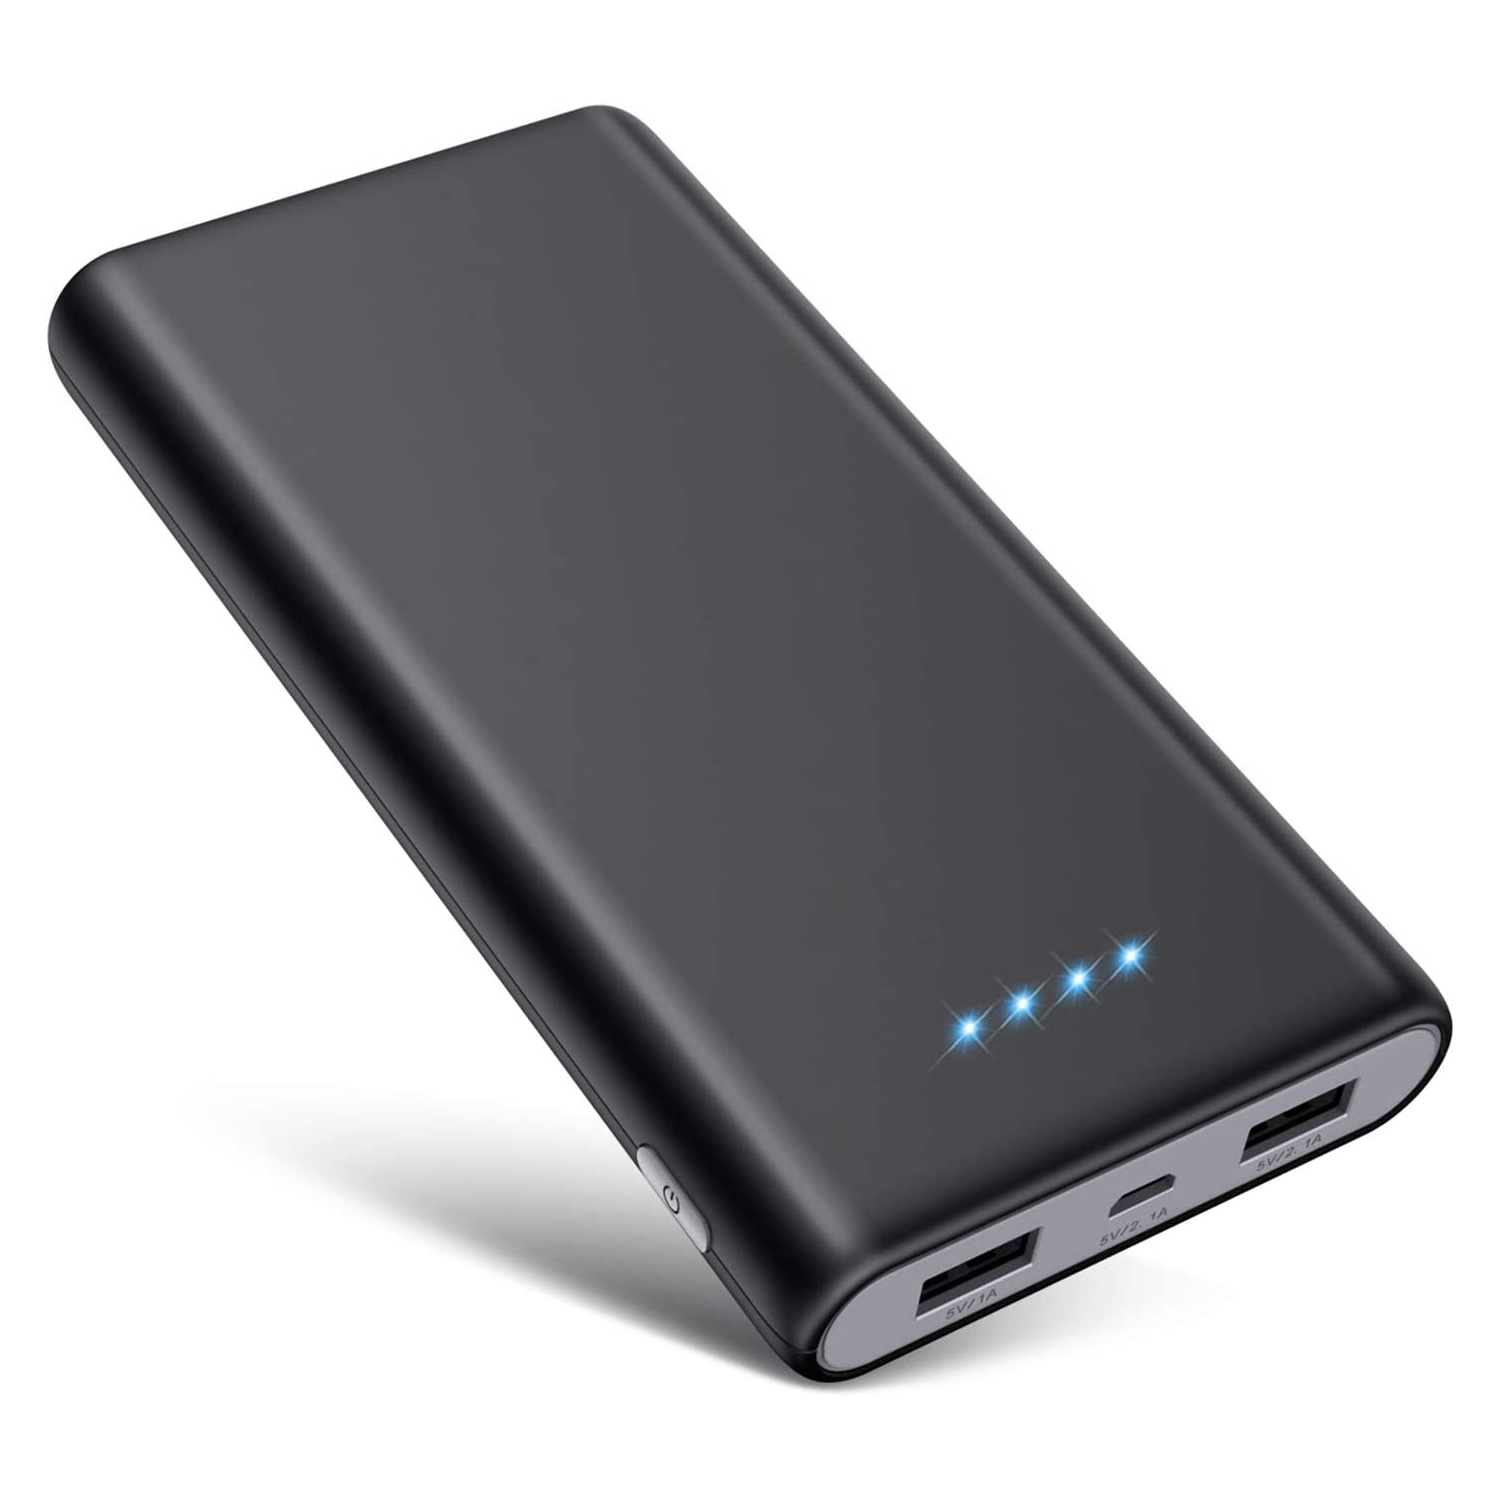 Portable Charge 26800mAh Power Bank Cell Phone Charger - 2X USB Ports Battery Pack for iPhone 11/Pro/Max/X/Xs, Samsung, Android and more